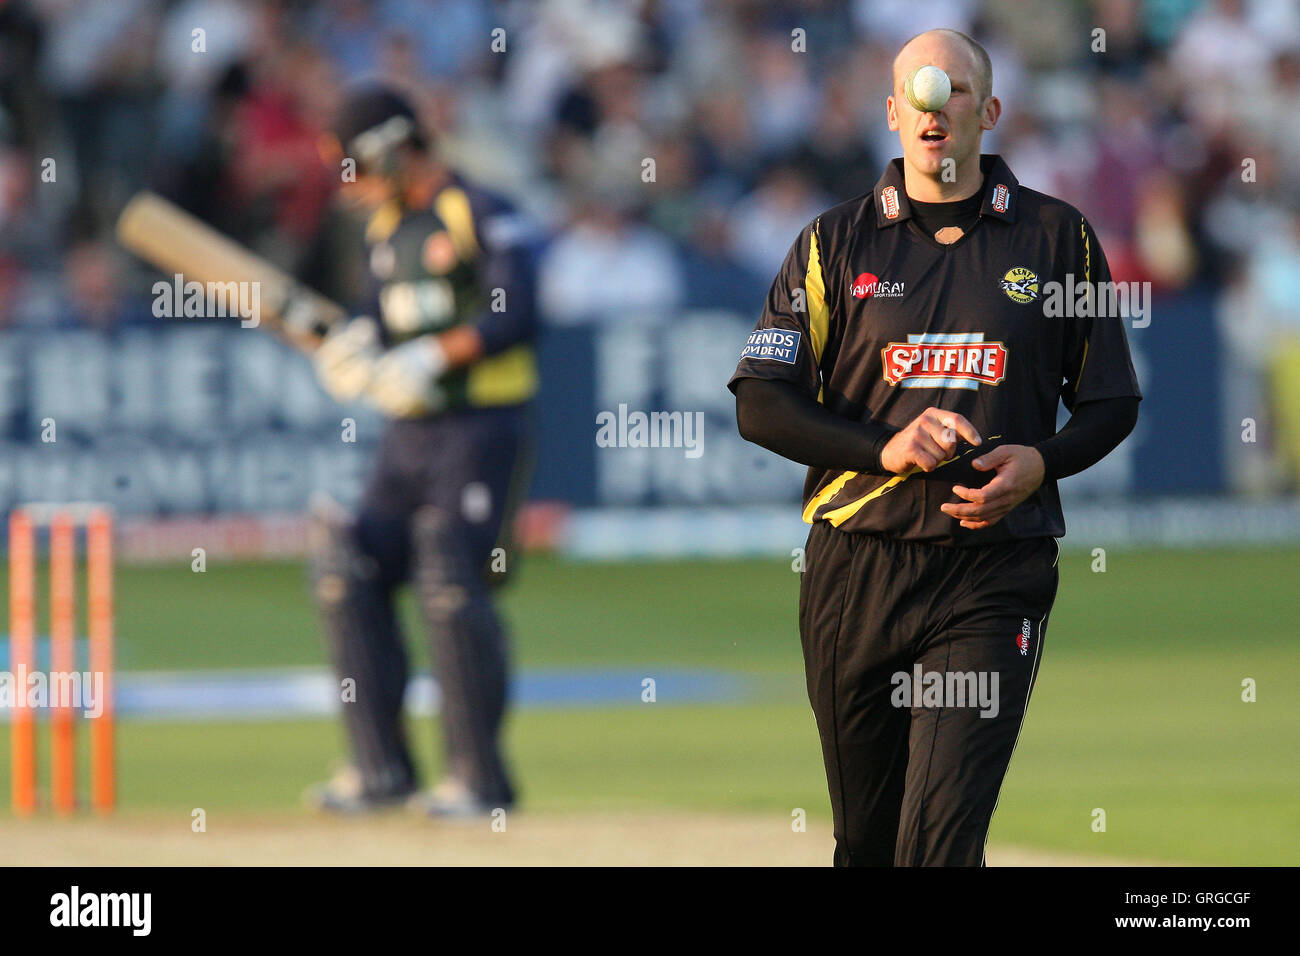 James Tredwell of Kent prepares to bowl - Essex Eagles vs Kent Spitfires - Friends Provident Twenty 20 T20 Cricket at the Ford County Ground, Chelmsford -  02/06/10 Stock Photo